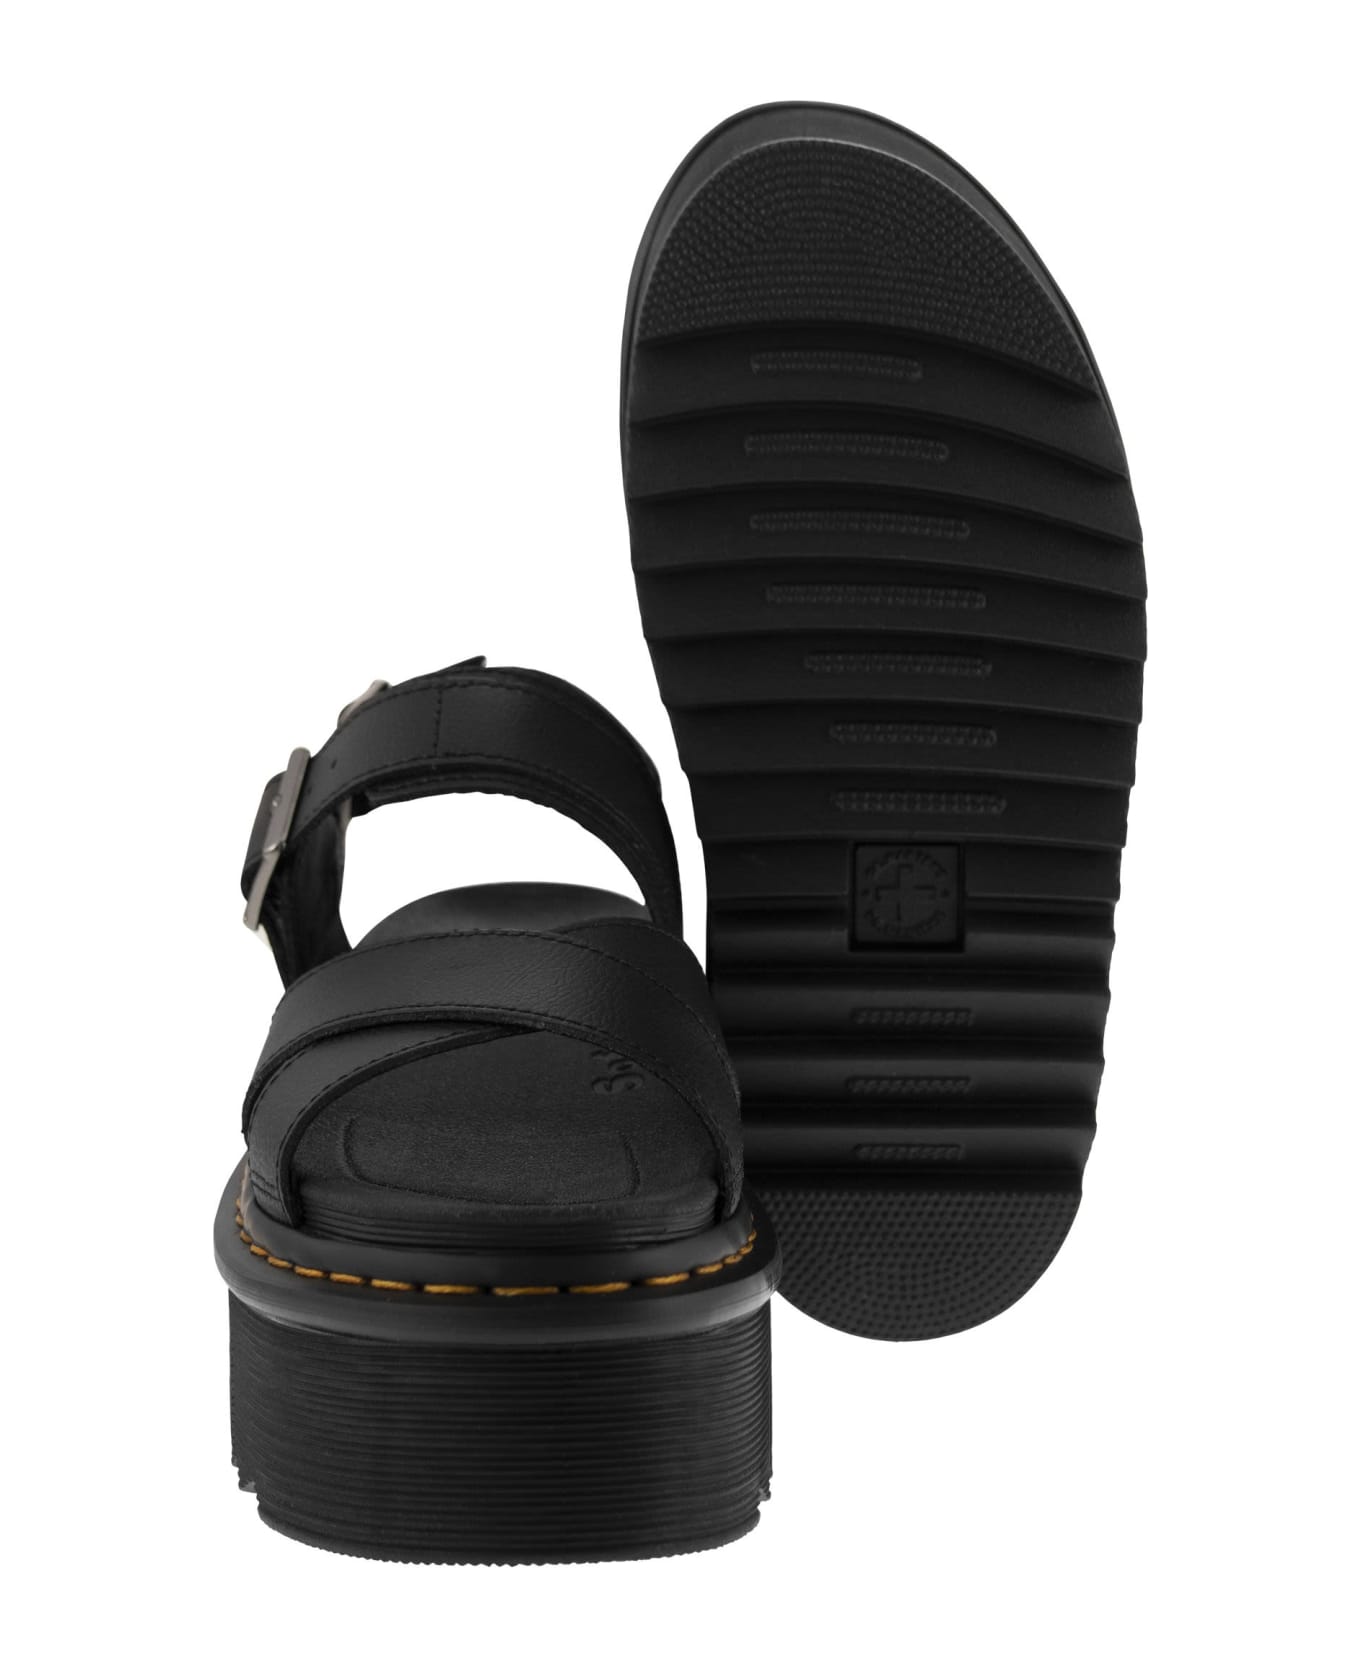 Dr. Martens Voss Ii Leather Sandals With Straps - Black